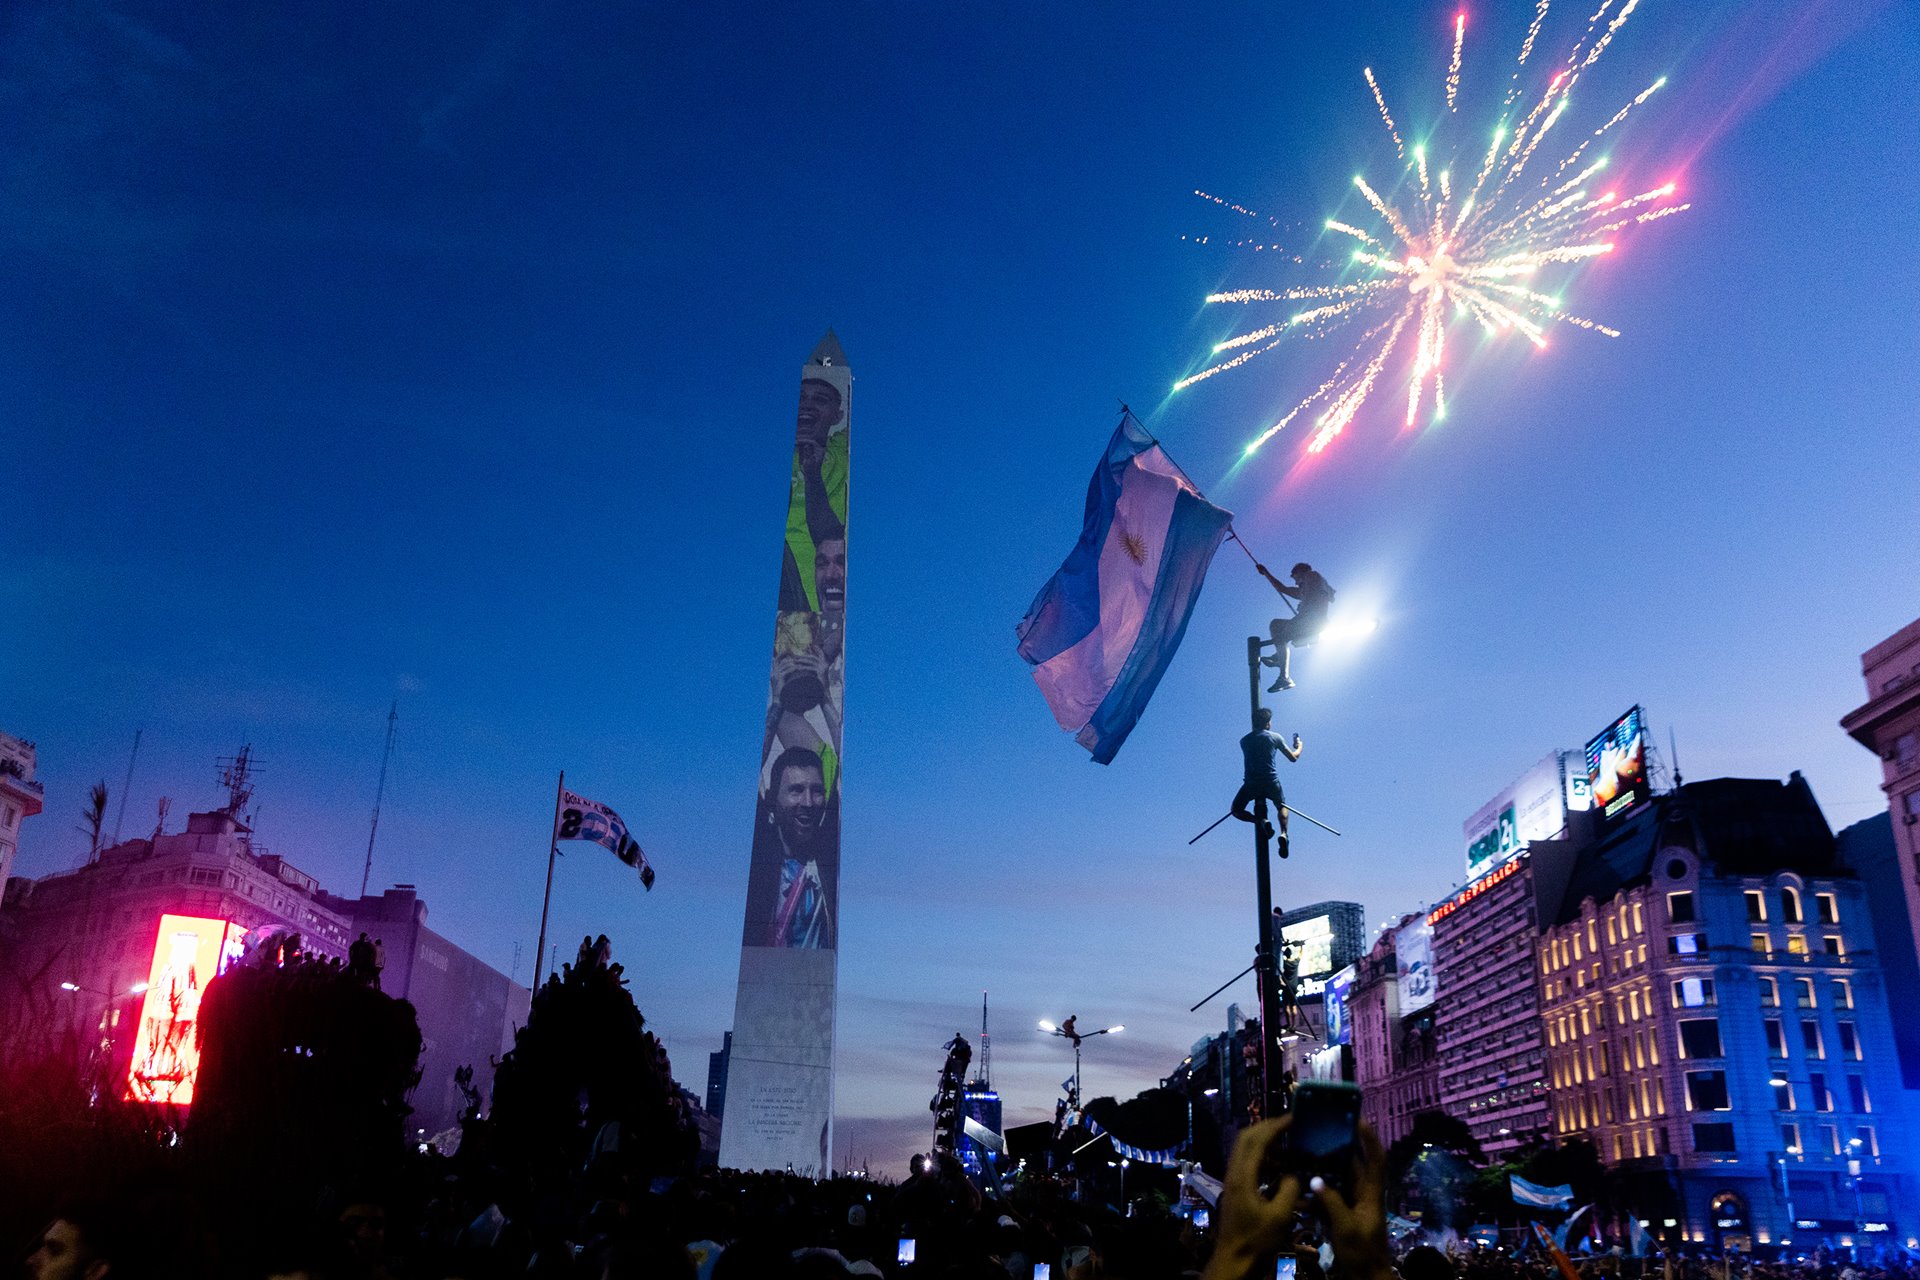 Fireworks explode overhead as fans raise the flag of Argentina next to the Obelisco de Buenos Aires, a national historical monument located in the Argentinian capital&rsquo;s main square.&nbsp;